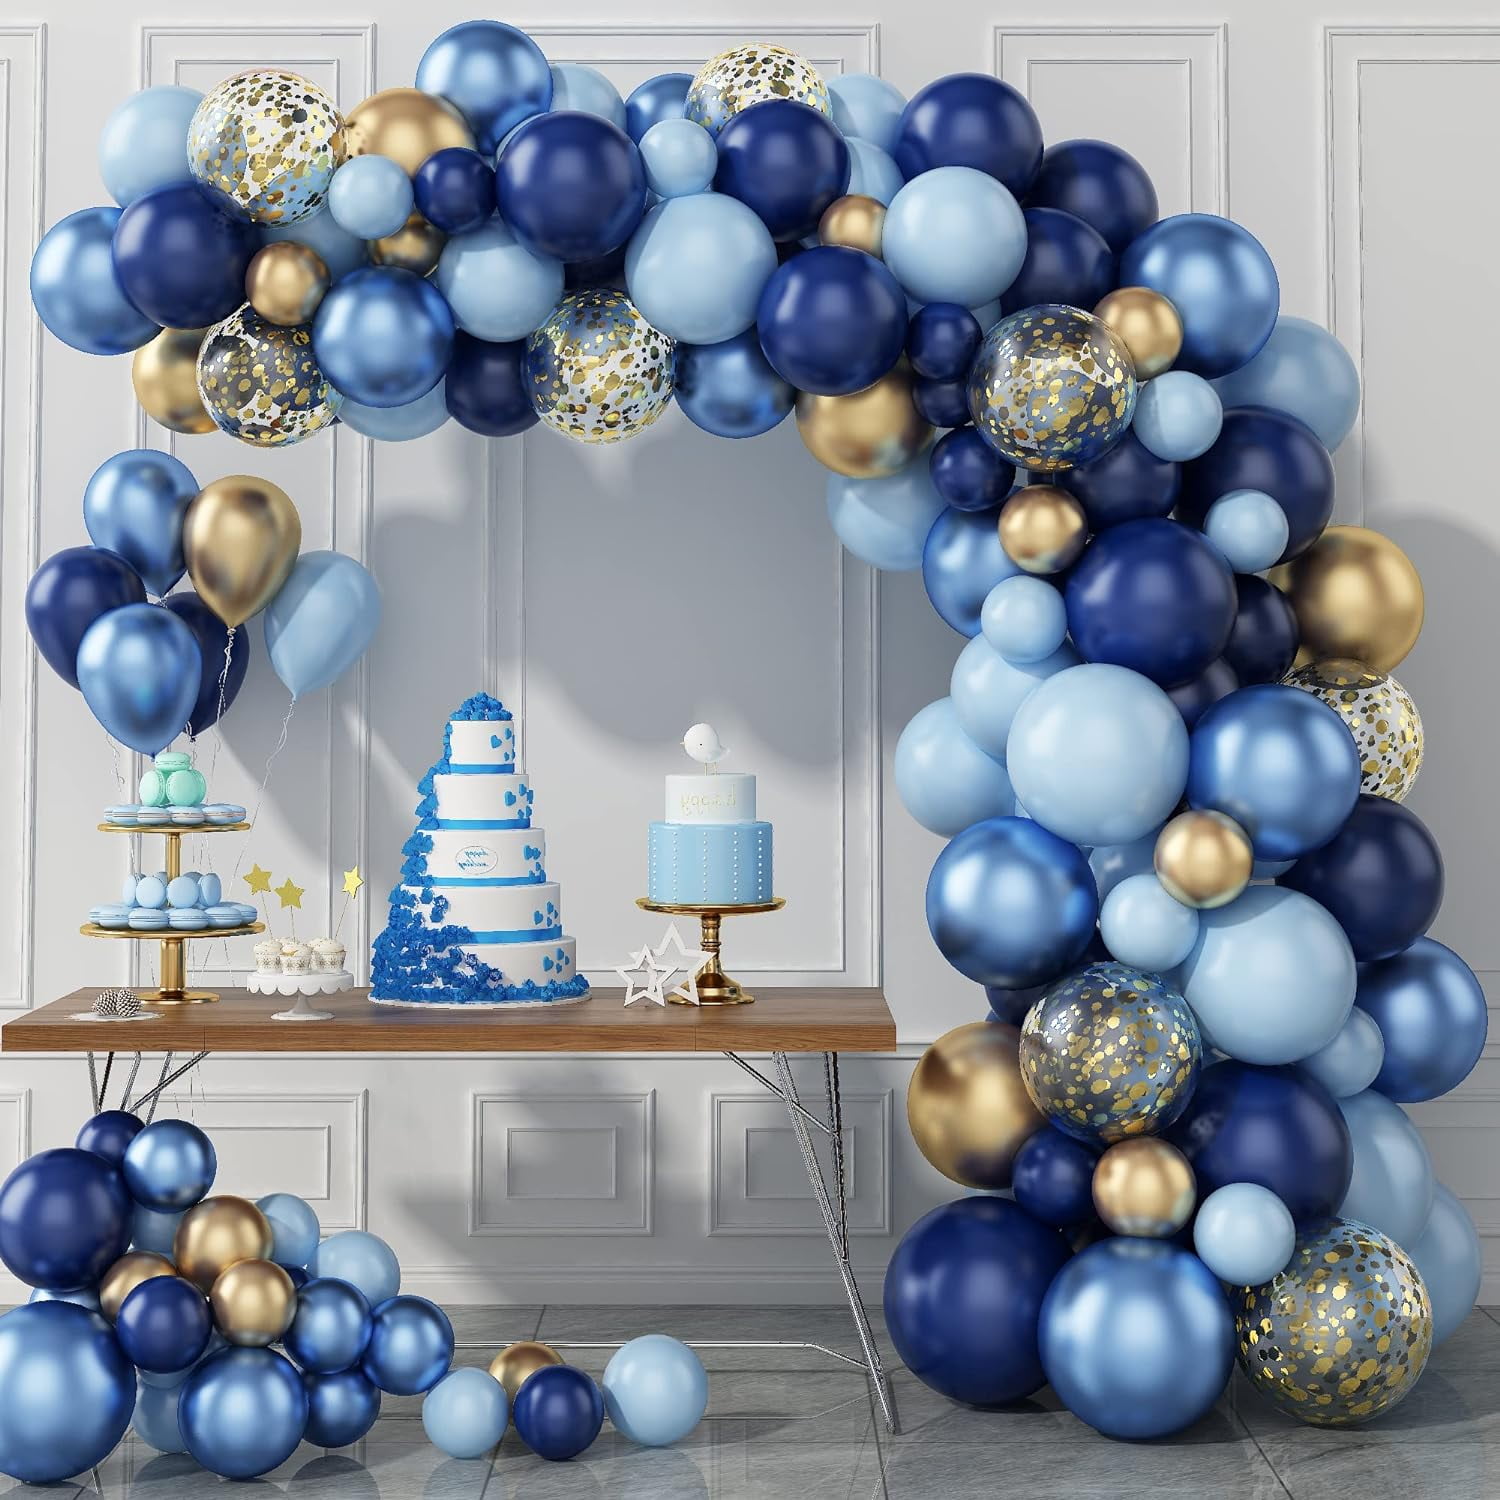 Blue Sea 25 Ft. Balloon Garland Kit with Fish Net - 81 Pc.